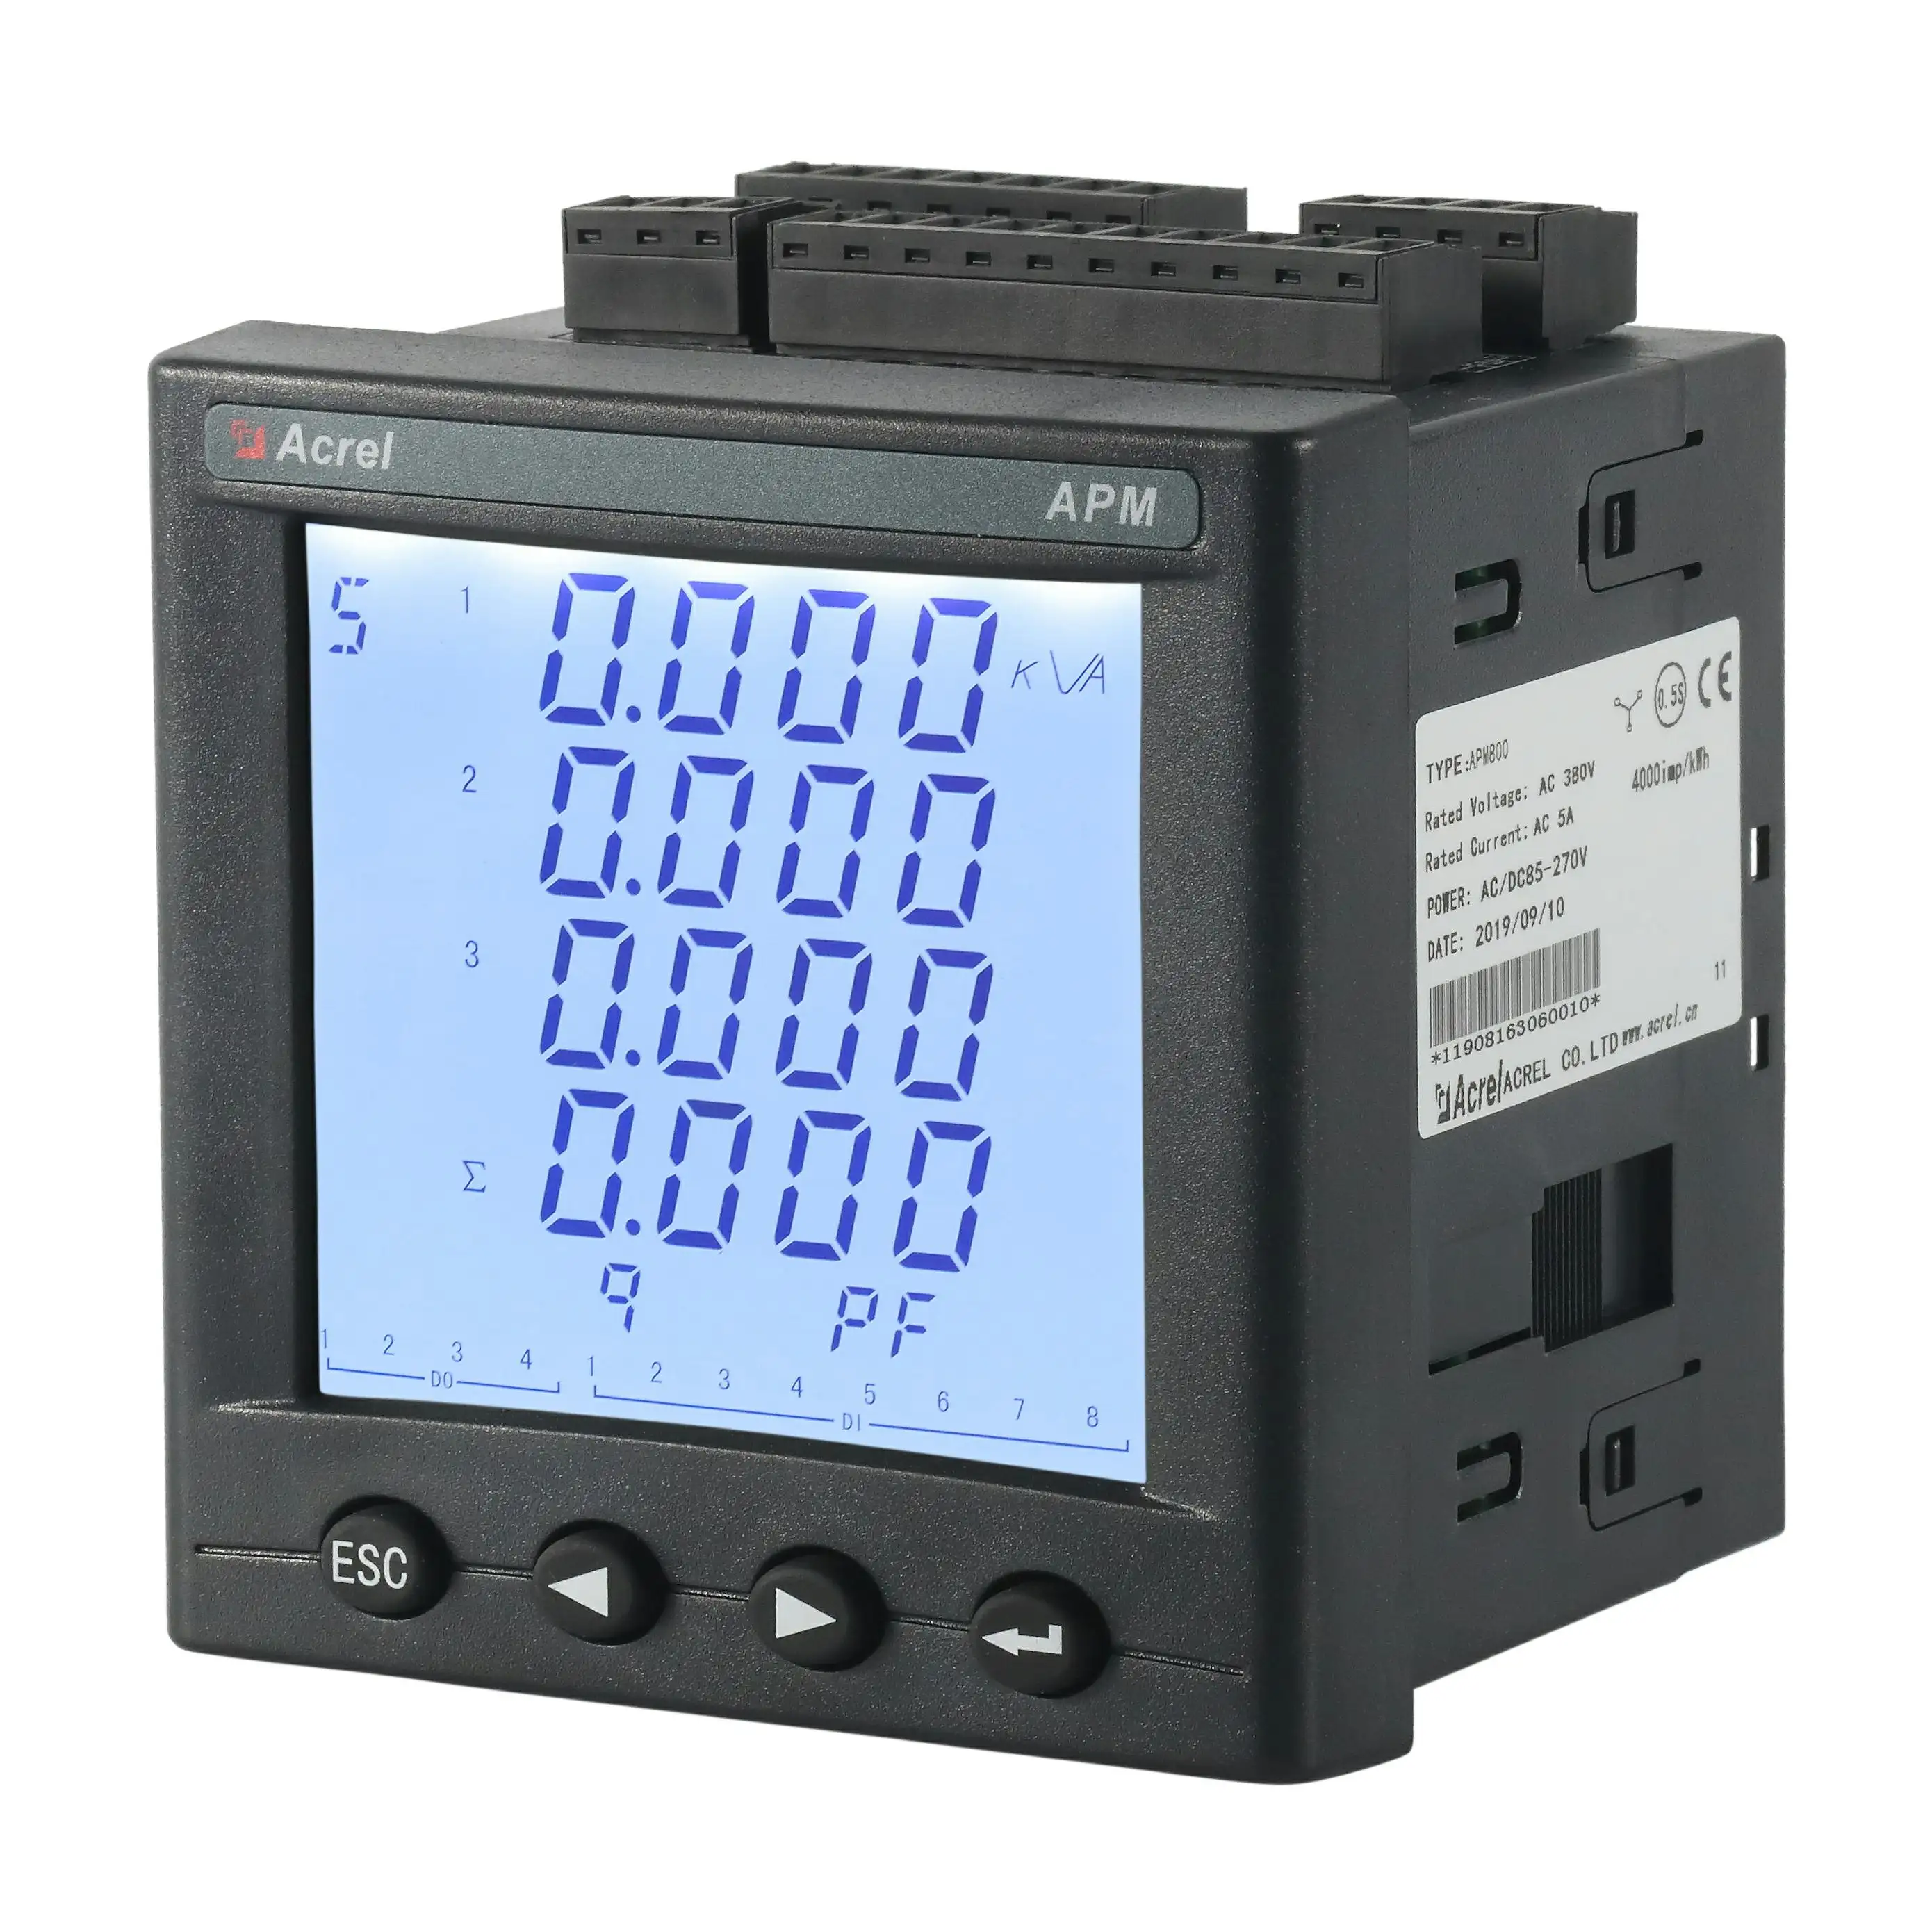 ACREL 3 Phase Smart Power Quality Energy Analyser Meter APM800 High Accuracy Class 0.5S With RS485 Modbus